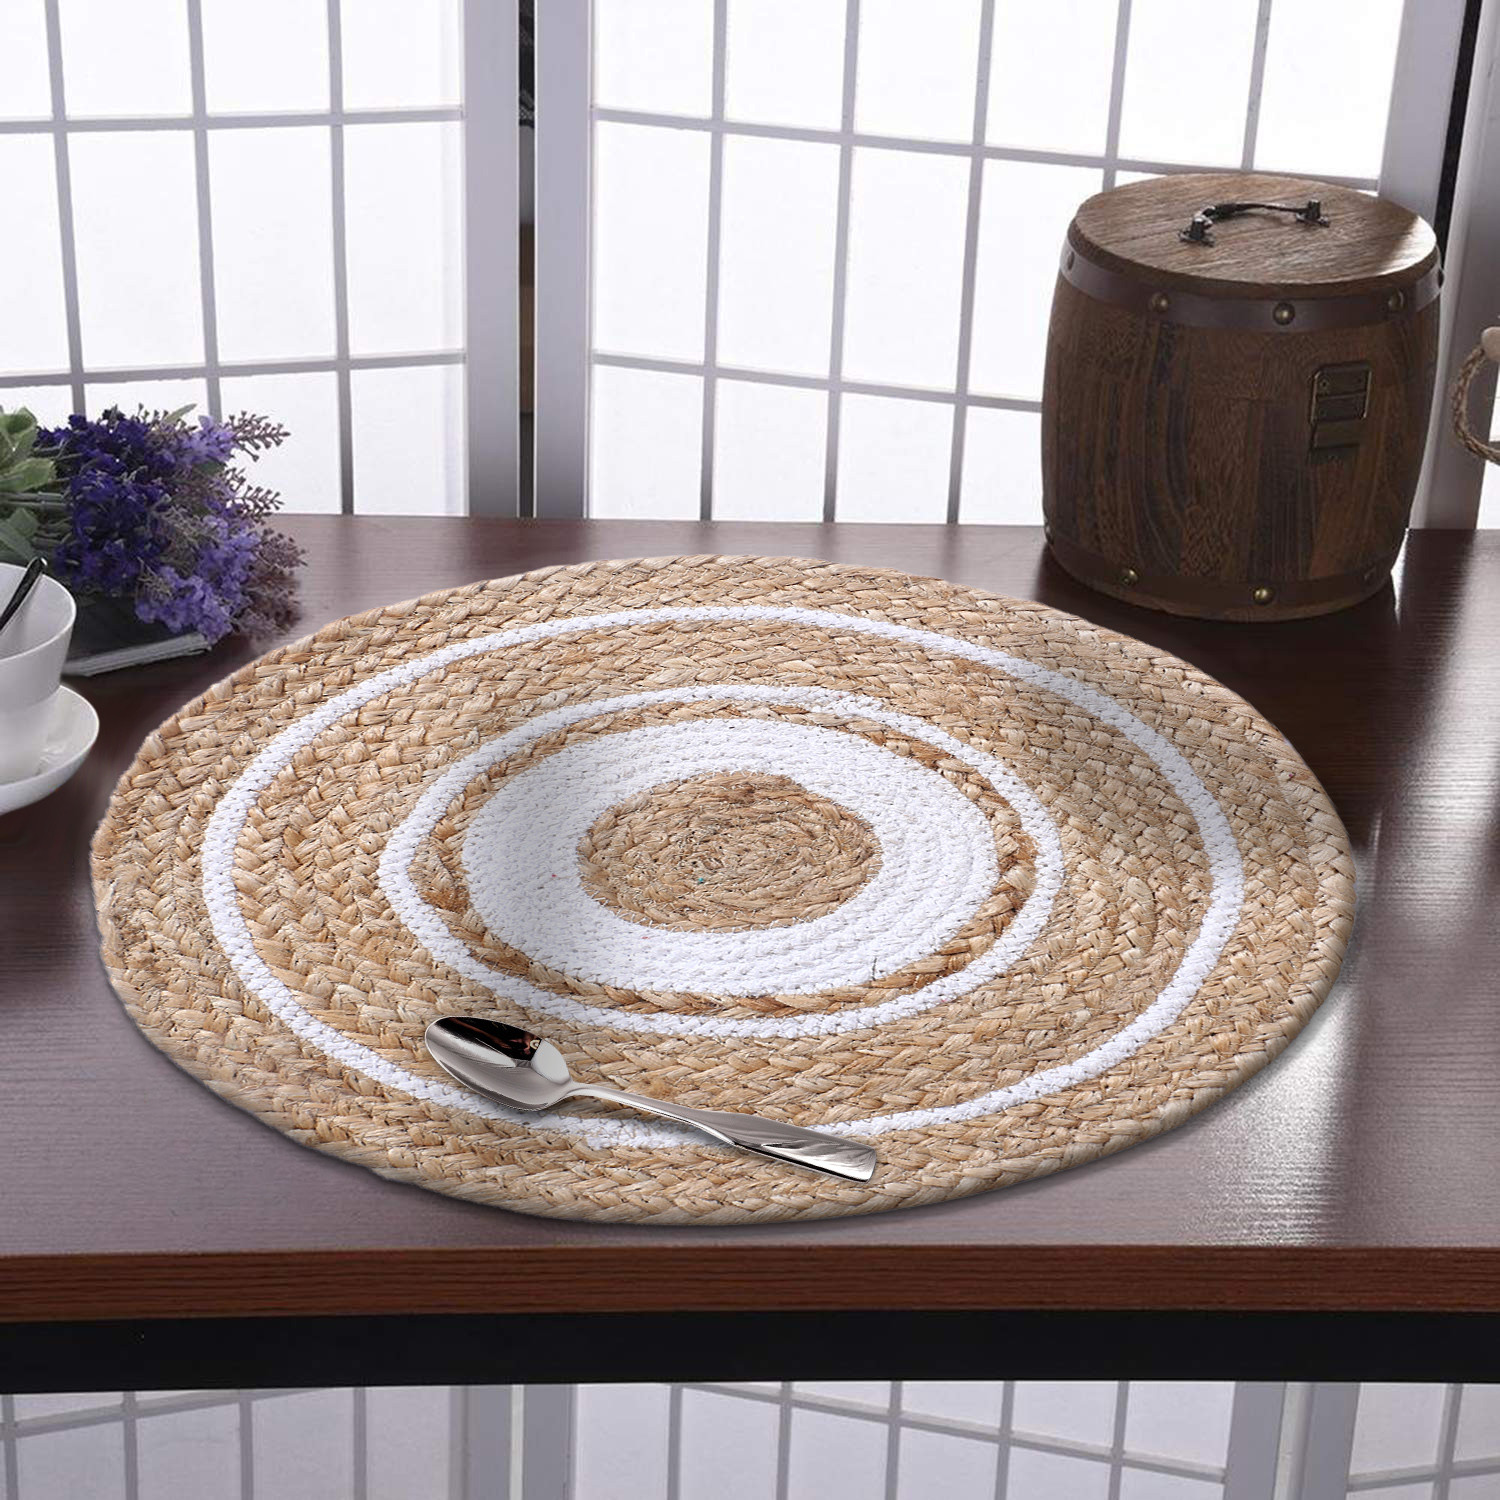 Kuber Industries Handmade Braided Carpet Rugs|Traditional Spiral Design Jute Placemat|Table Top Mat For Bedroom,Living Room,Dining Room,36x36 cm,(White)